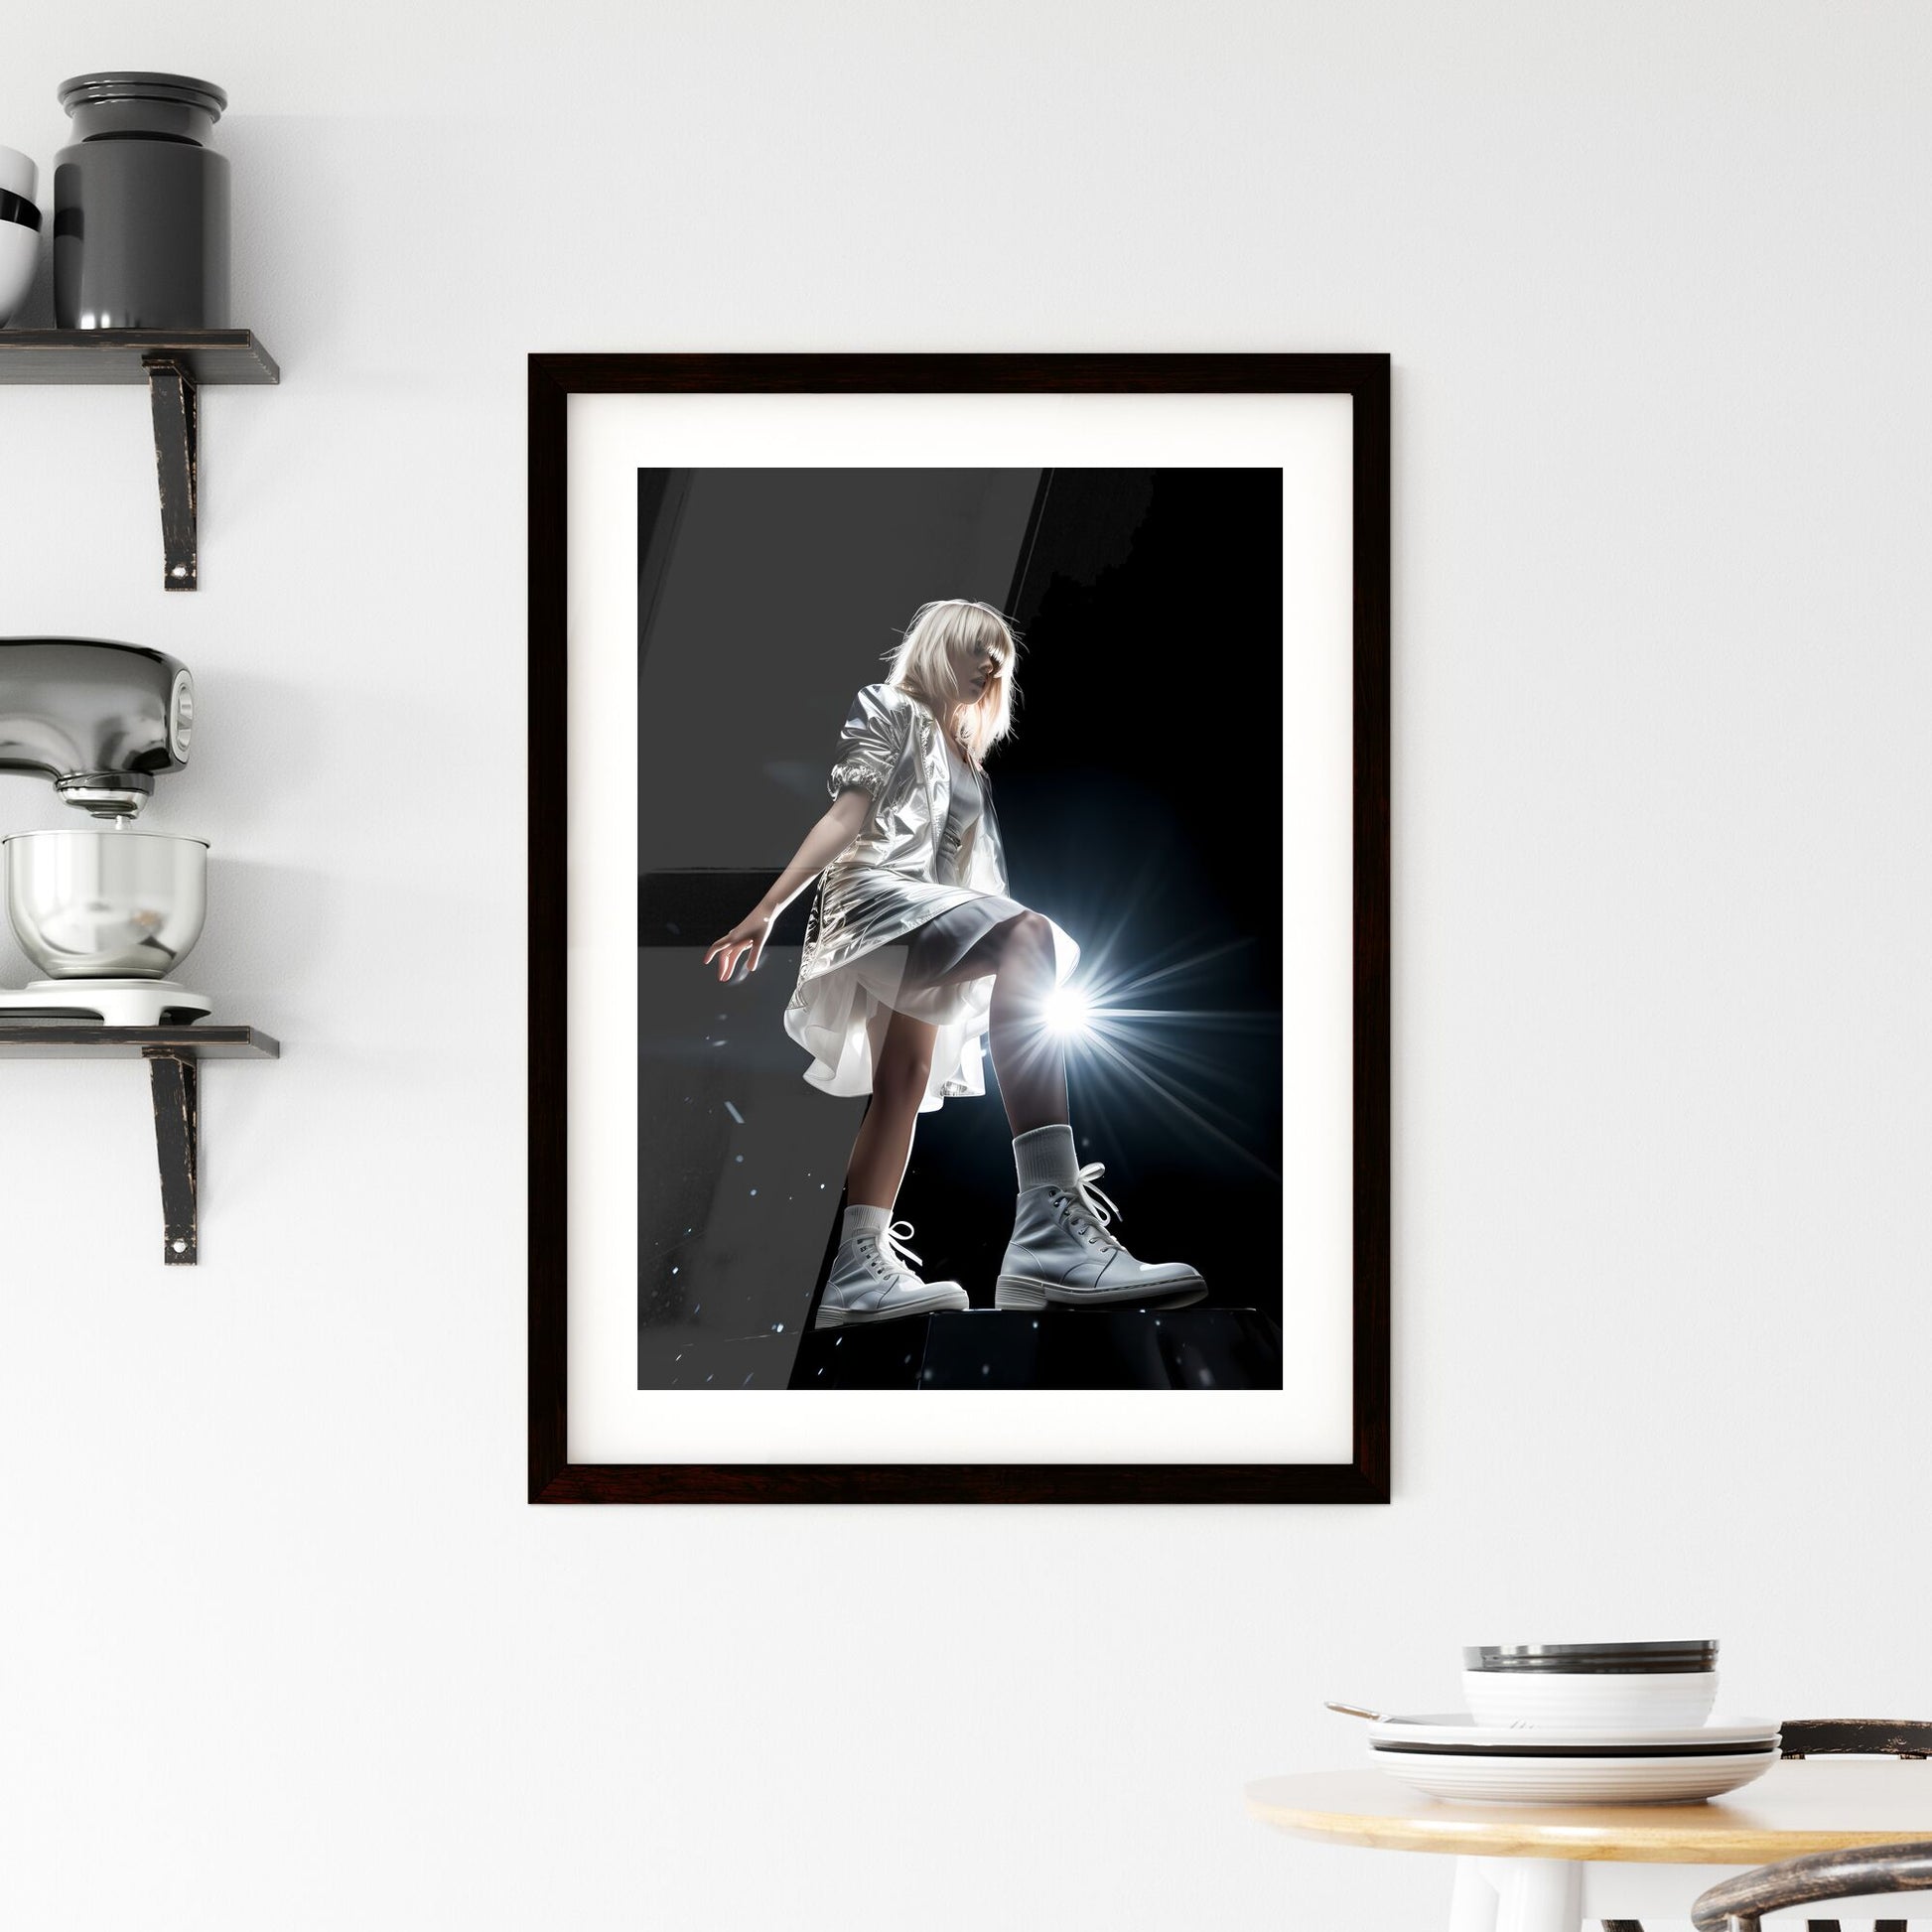 A Poster of very low angle - A Woman In A Silver Dress And White Boots Default Title